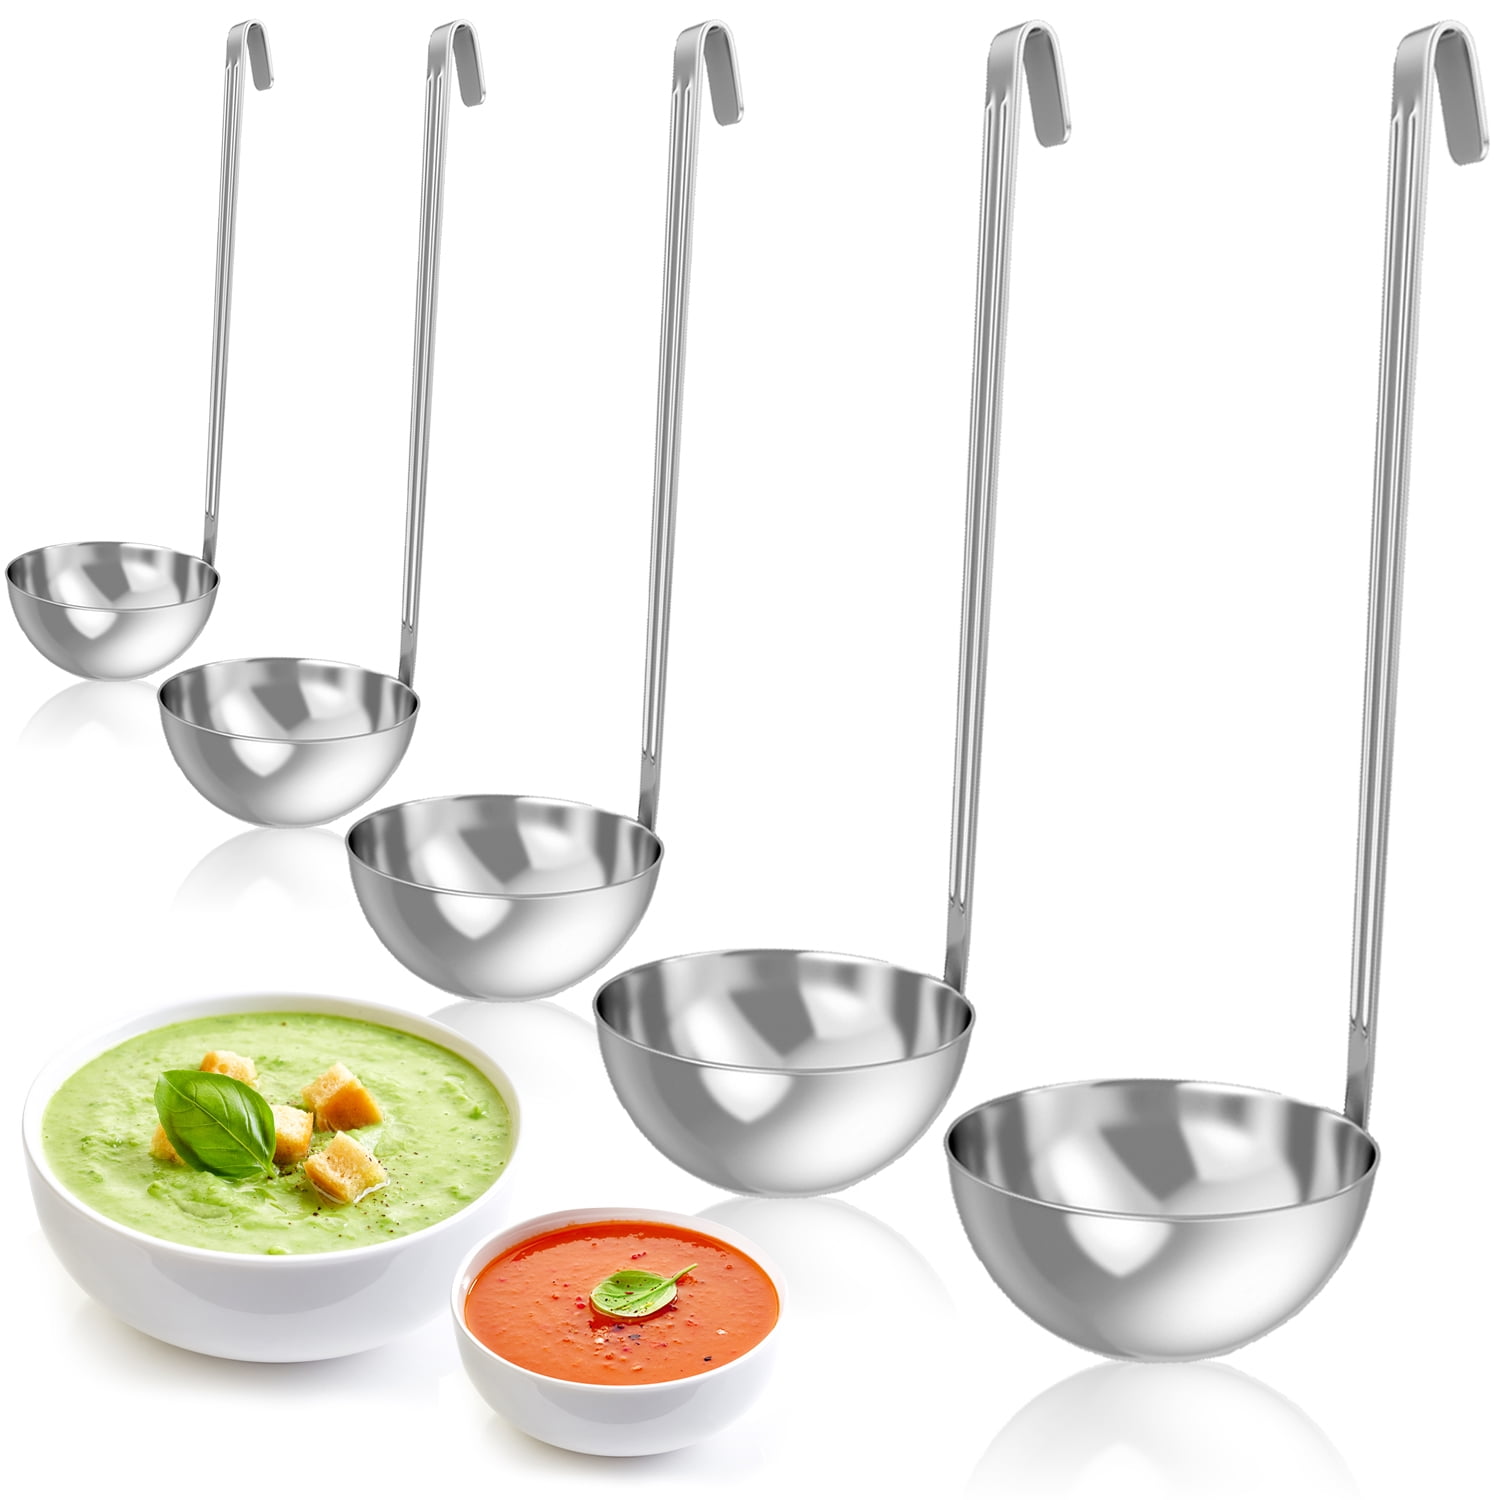 Soup Ladles For Cooking, 0.5, 2, 4, 6 & 8oz Stainless Steel Ladle, Canning  Ladle Big Spoon Ladell Set For Ramen and Kitchen Serving, Metal Portion  Control Serving Spoons, Cucharones de Cocina. 